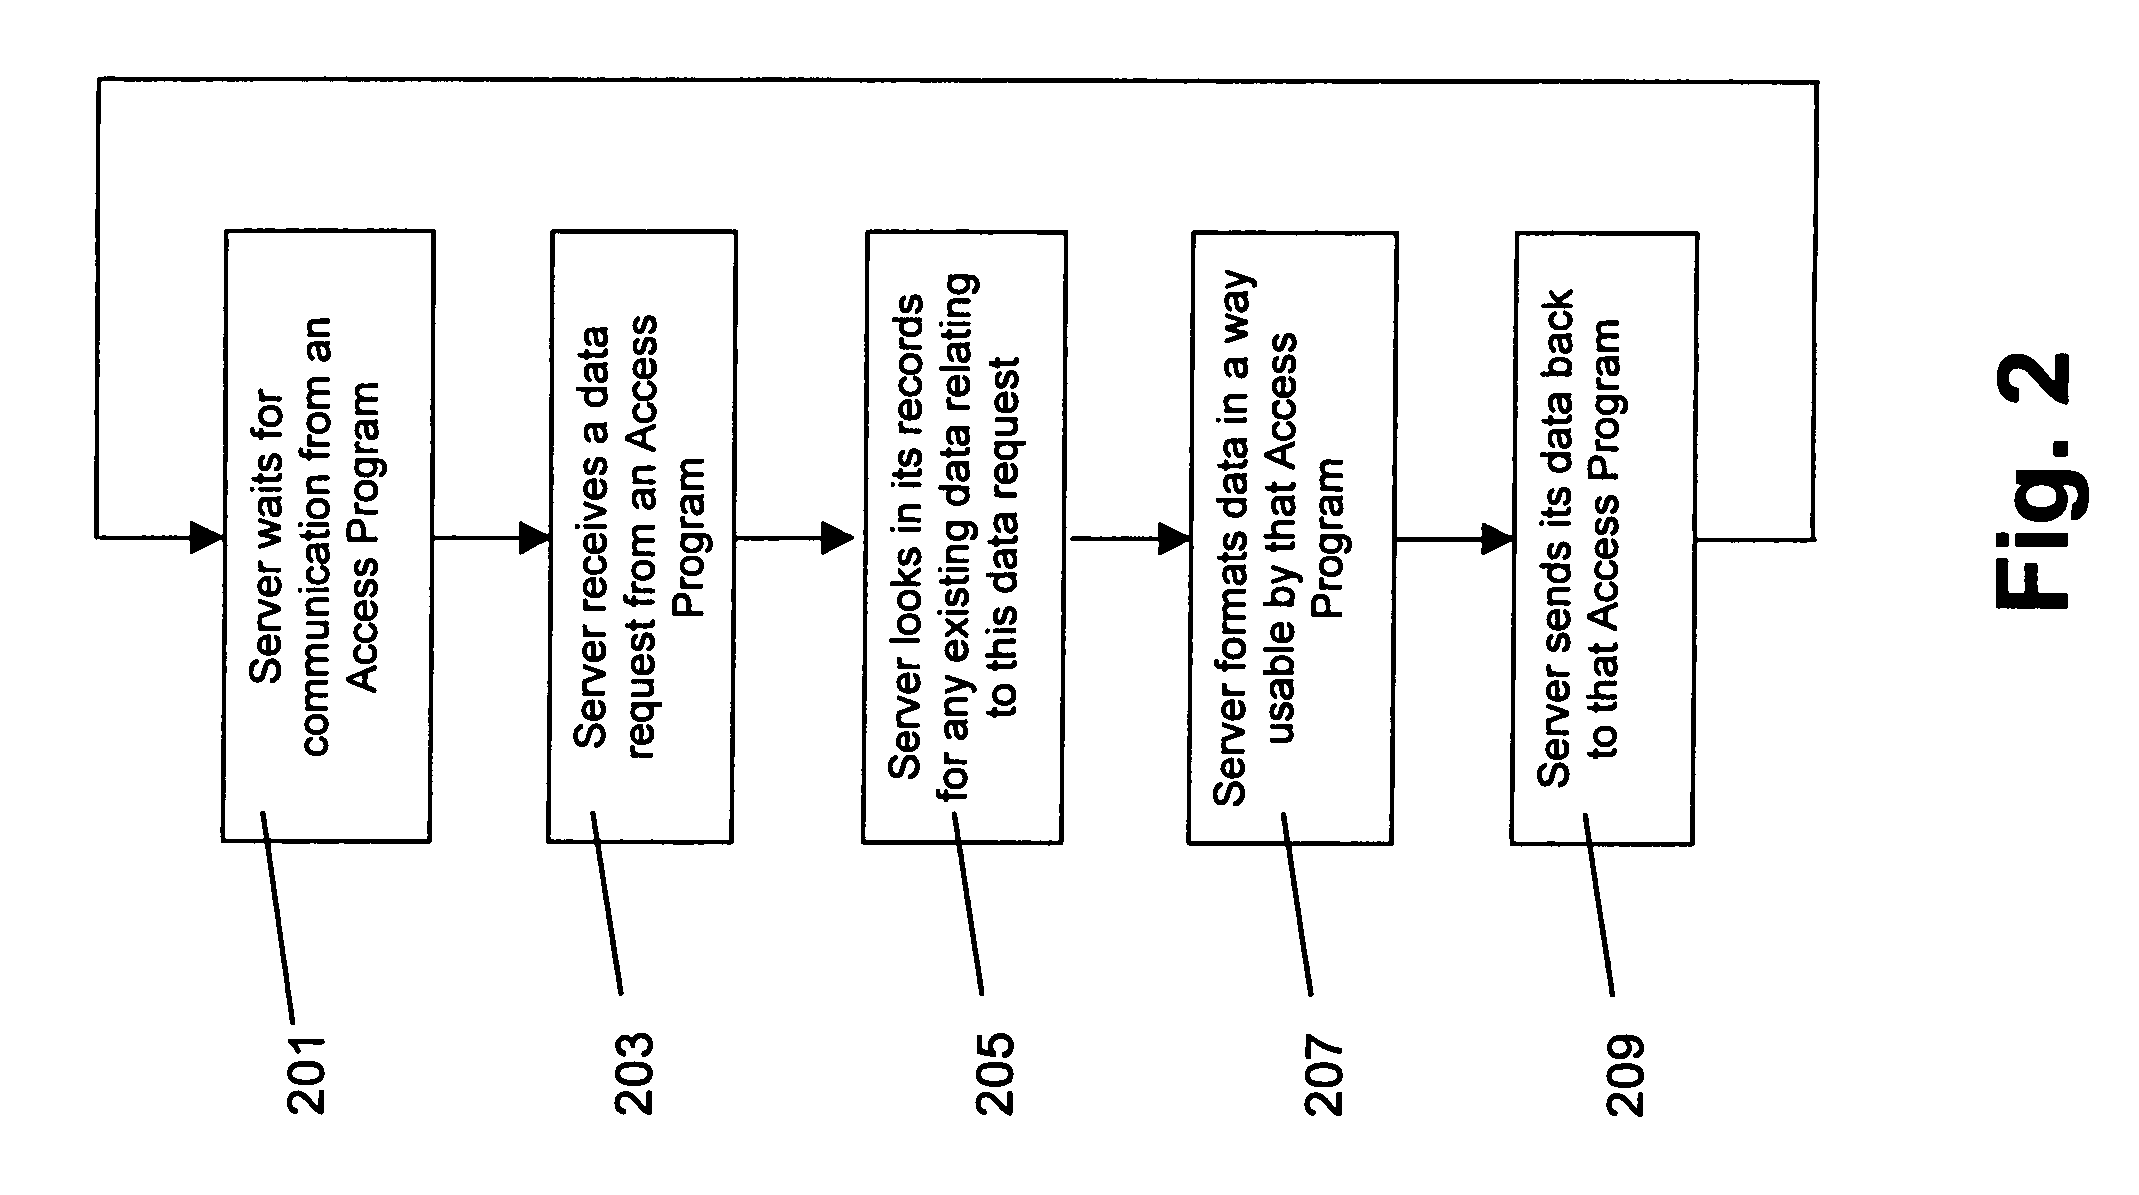 Method of associating independently-provided content with webpages